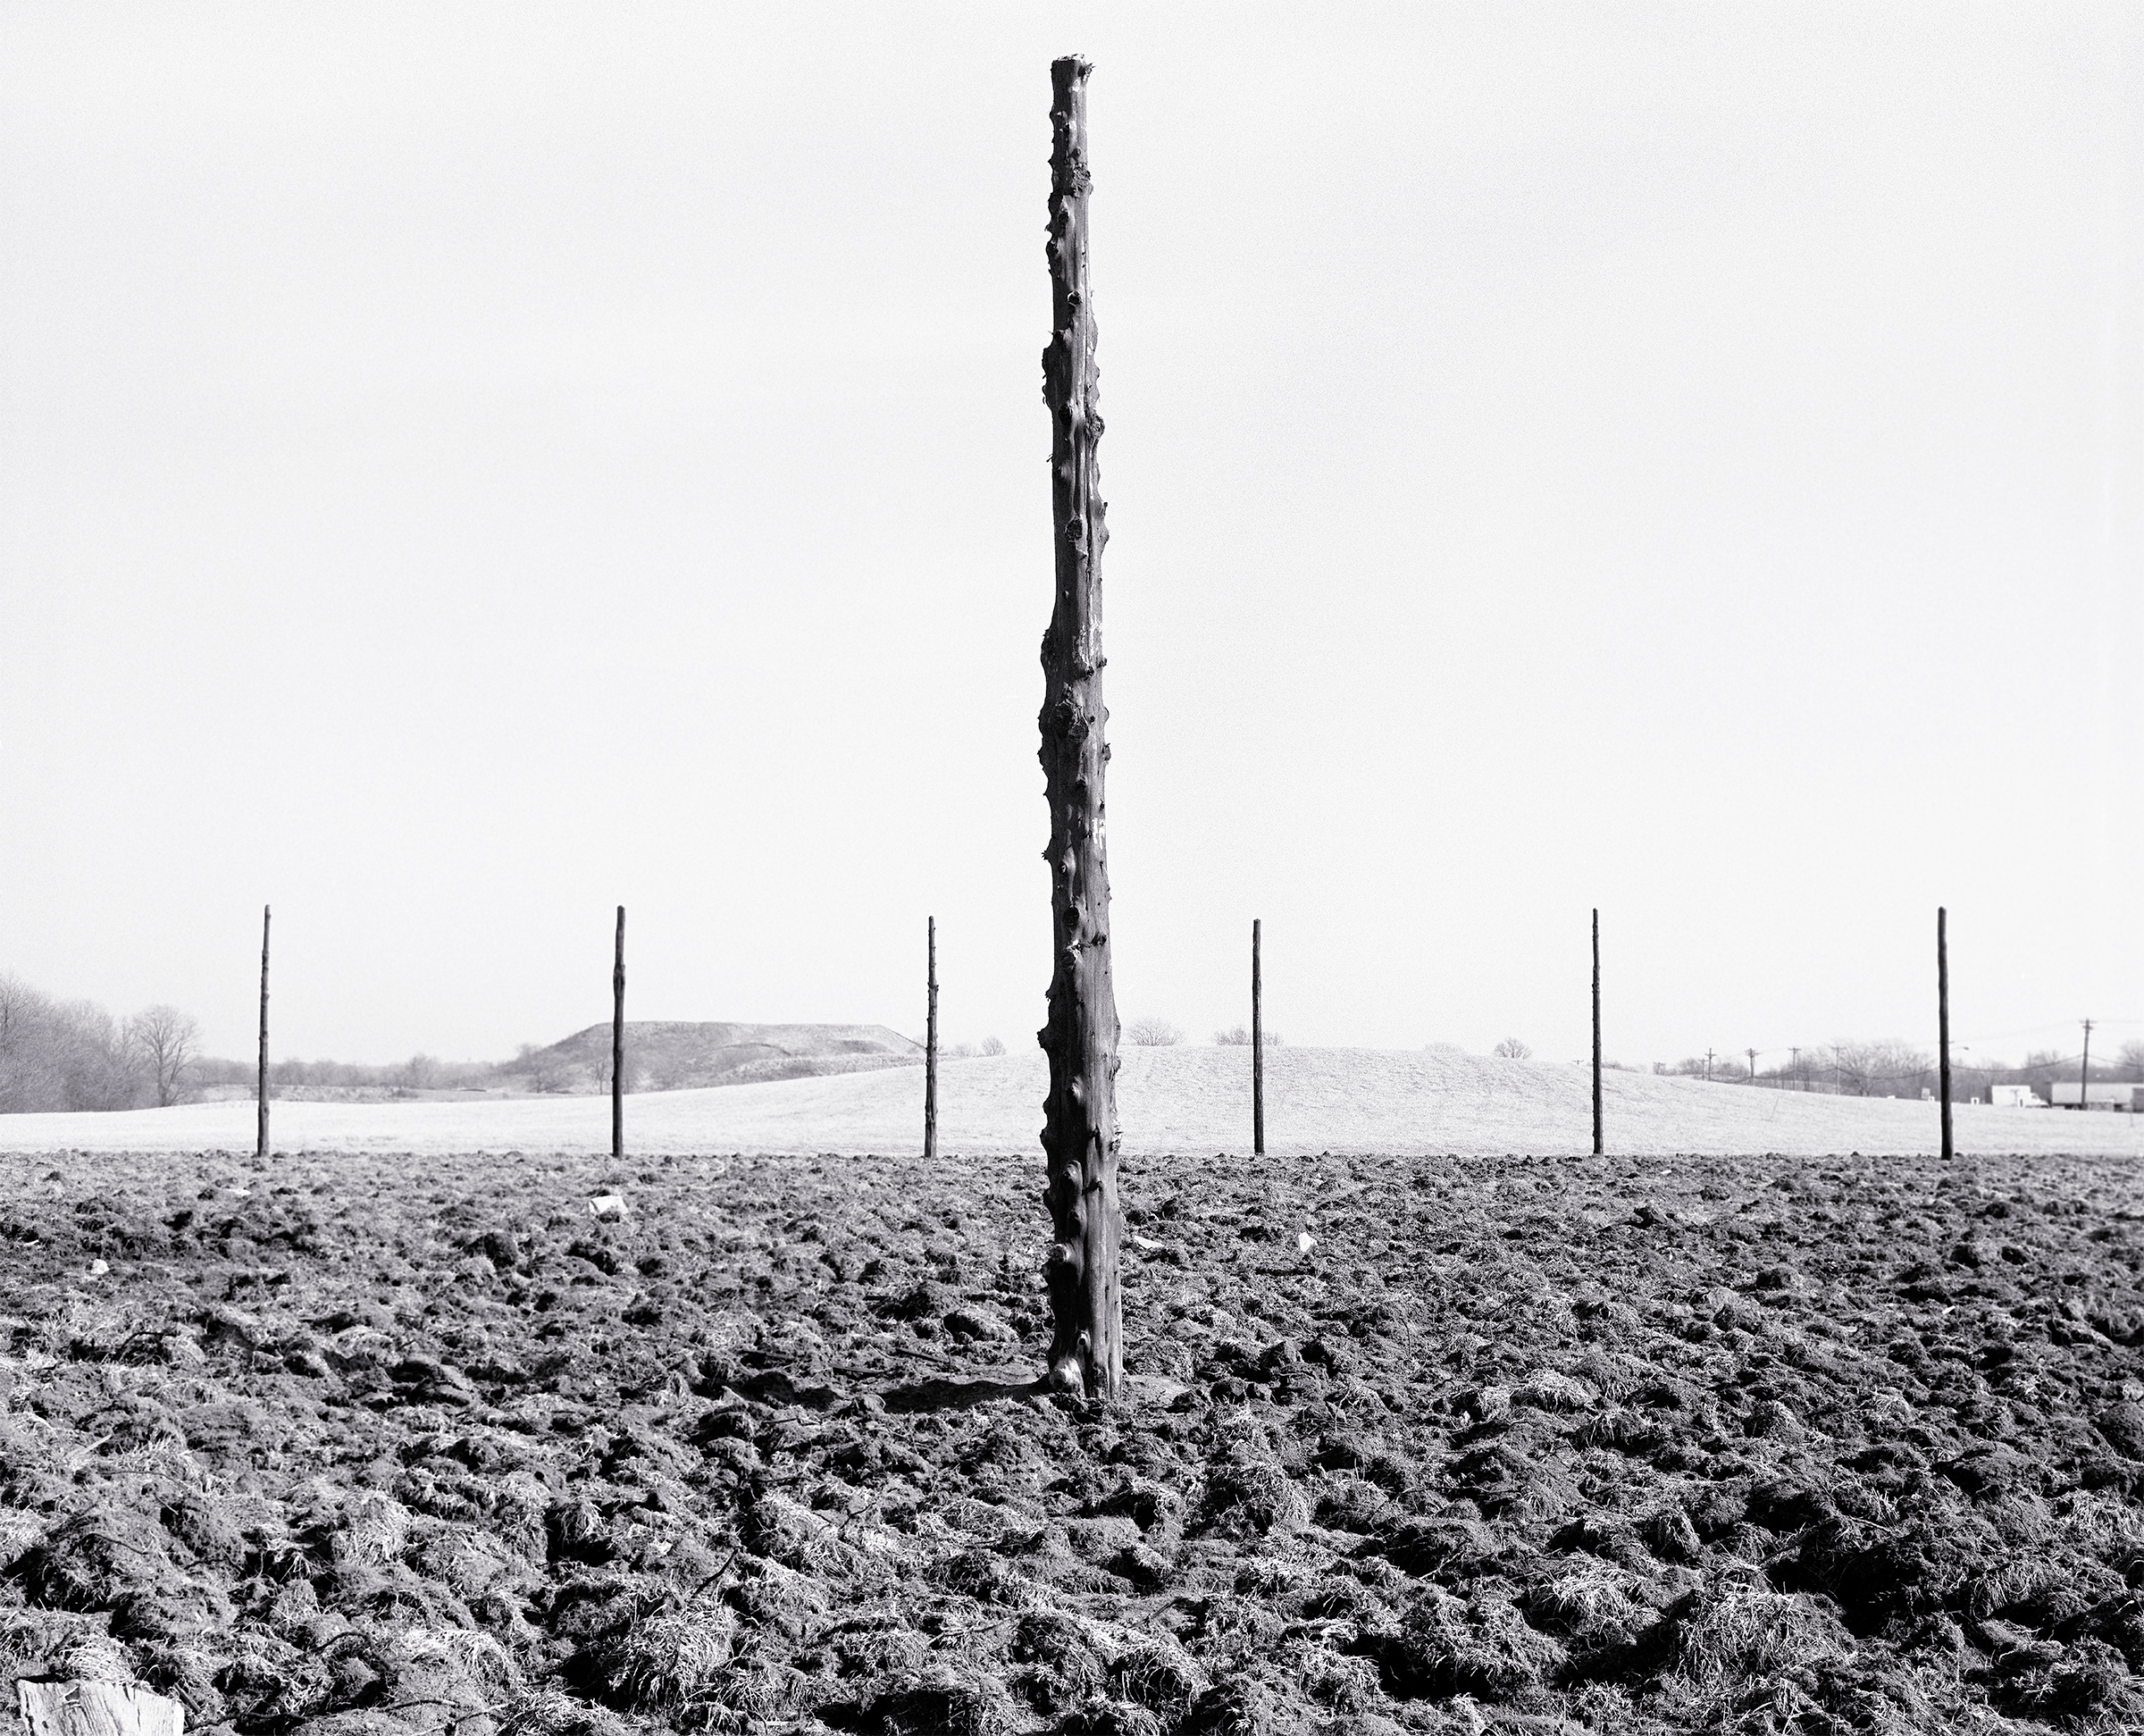 A large wooden pole stands on the ground with six other wooden poles arranged around it